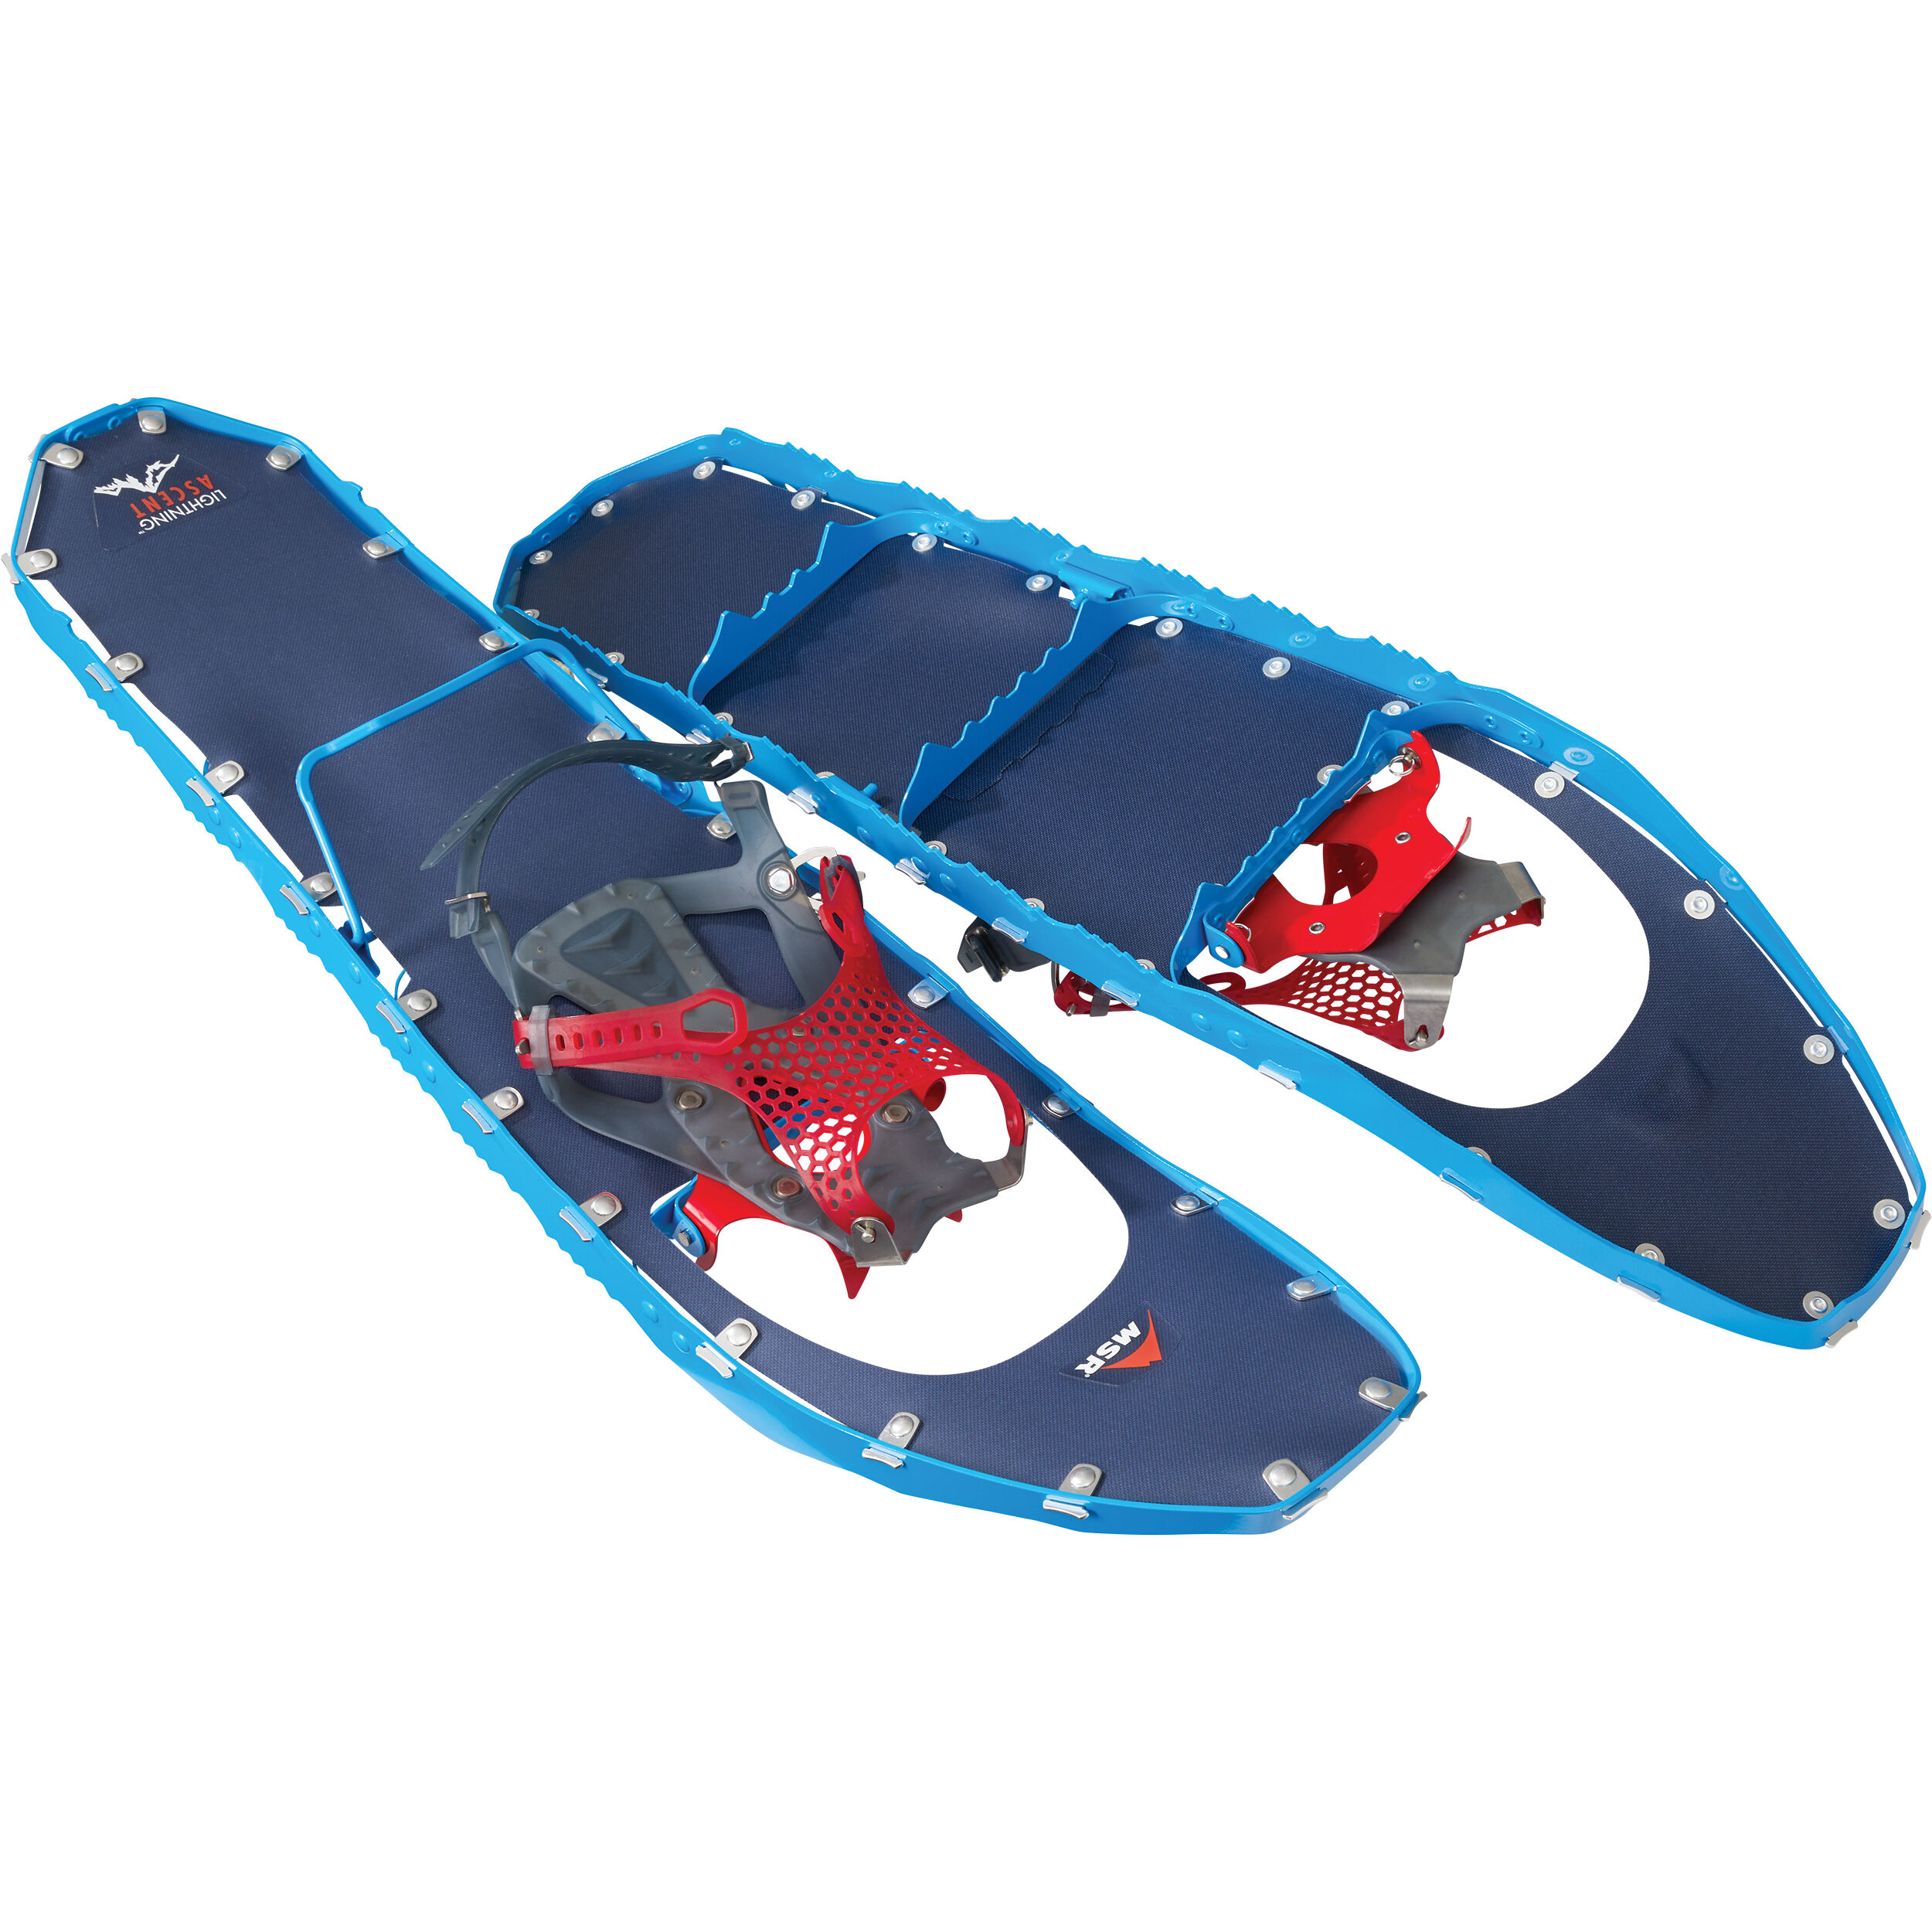 MSR Lightning Ascent Backcountry & Mountaineering Snowshoes with Paragon Bindings